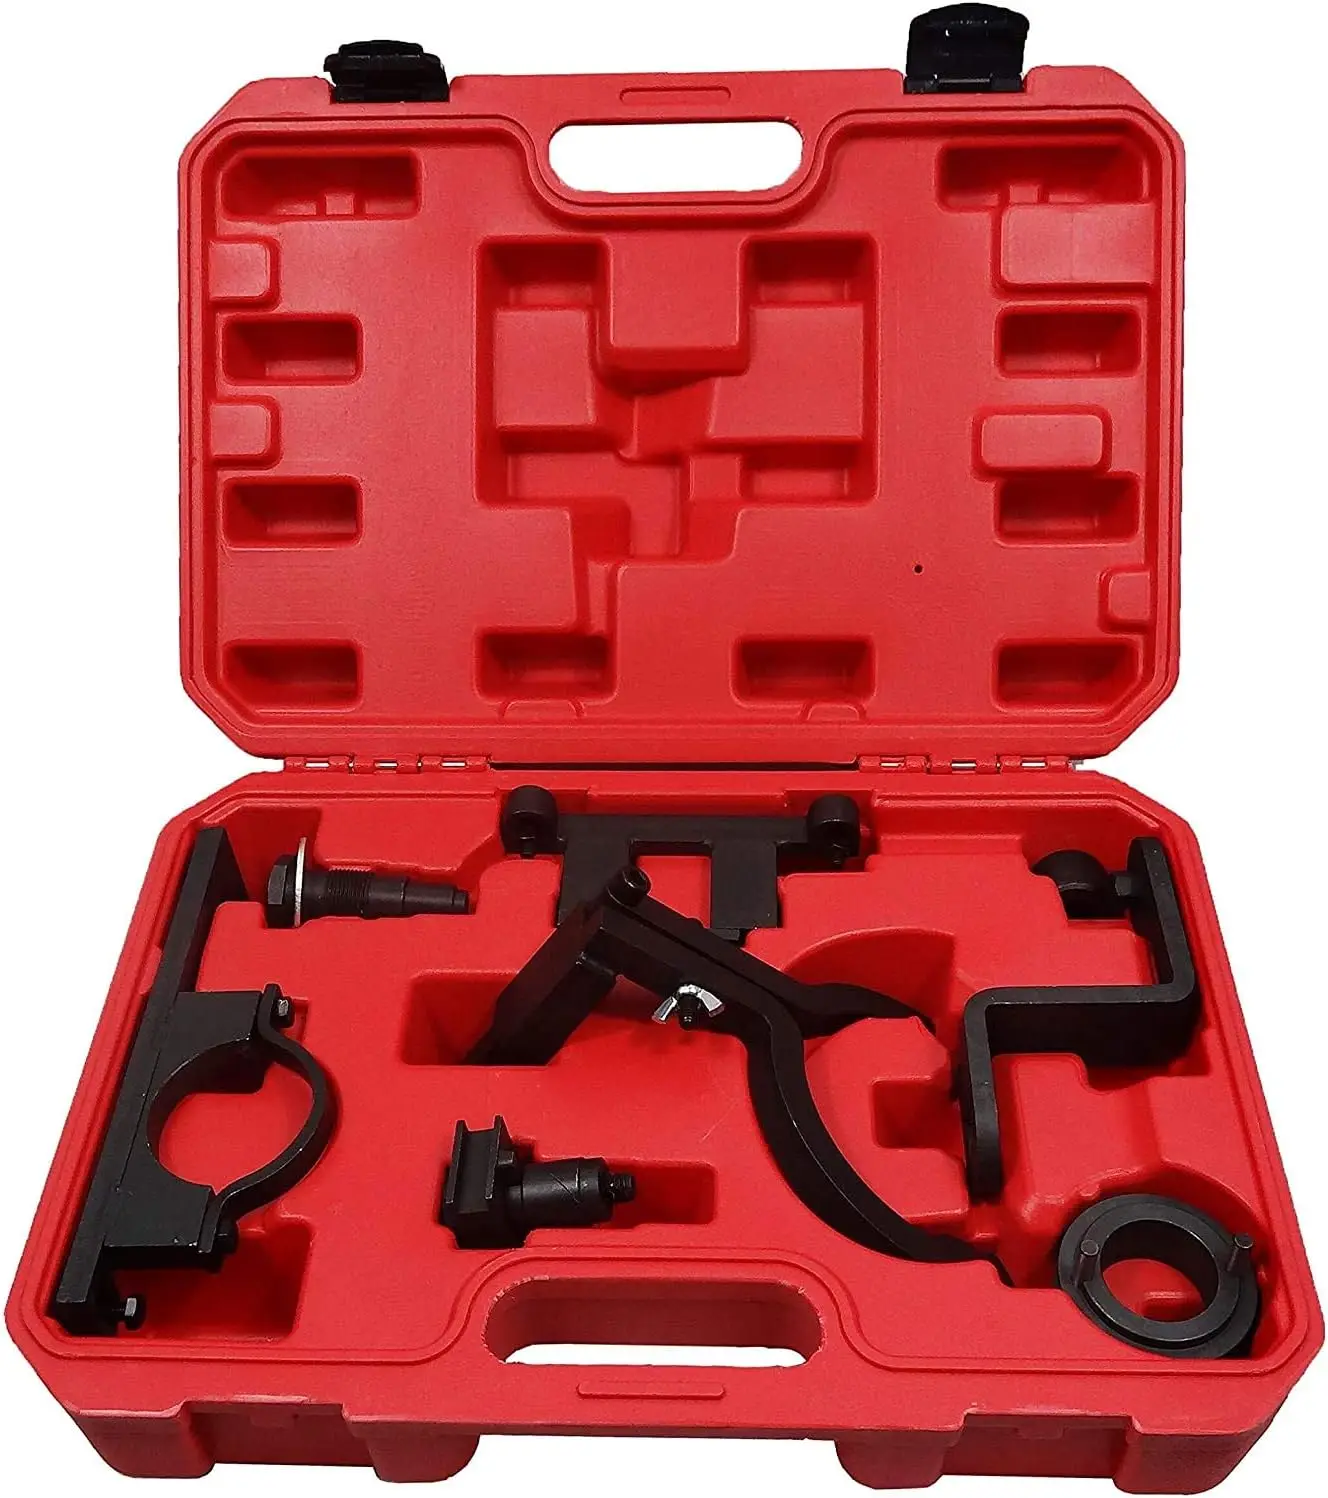 

Alignment Timing Locking Tool Compatible with Explorer Mustang Ranger Mercury Mountaineer B4000 4.0L SOHC V6 8 Pieces